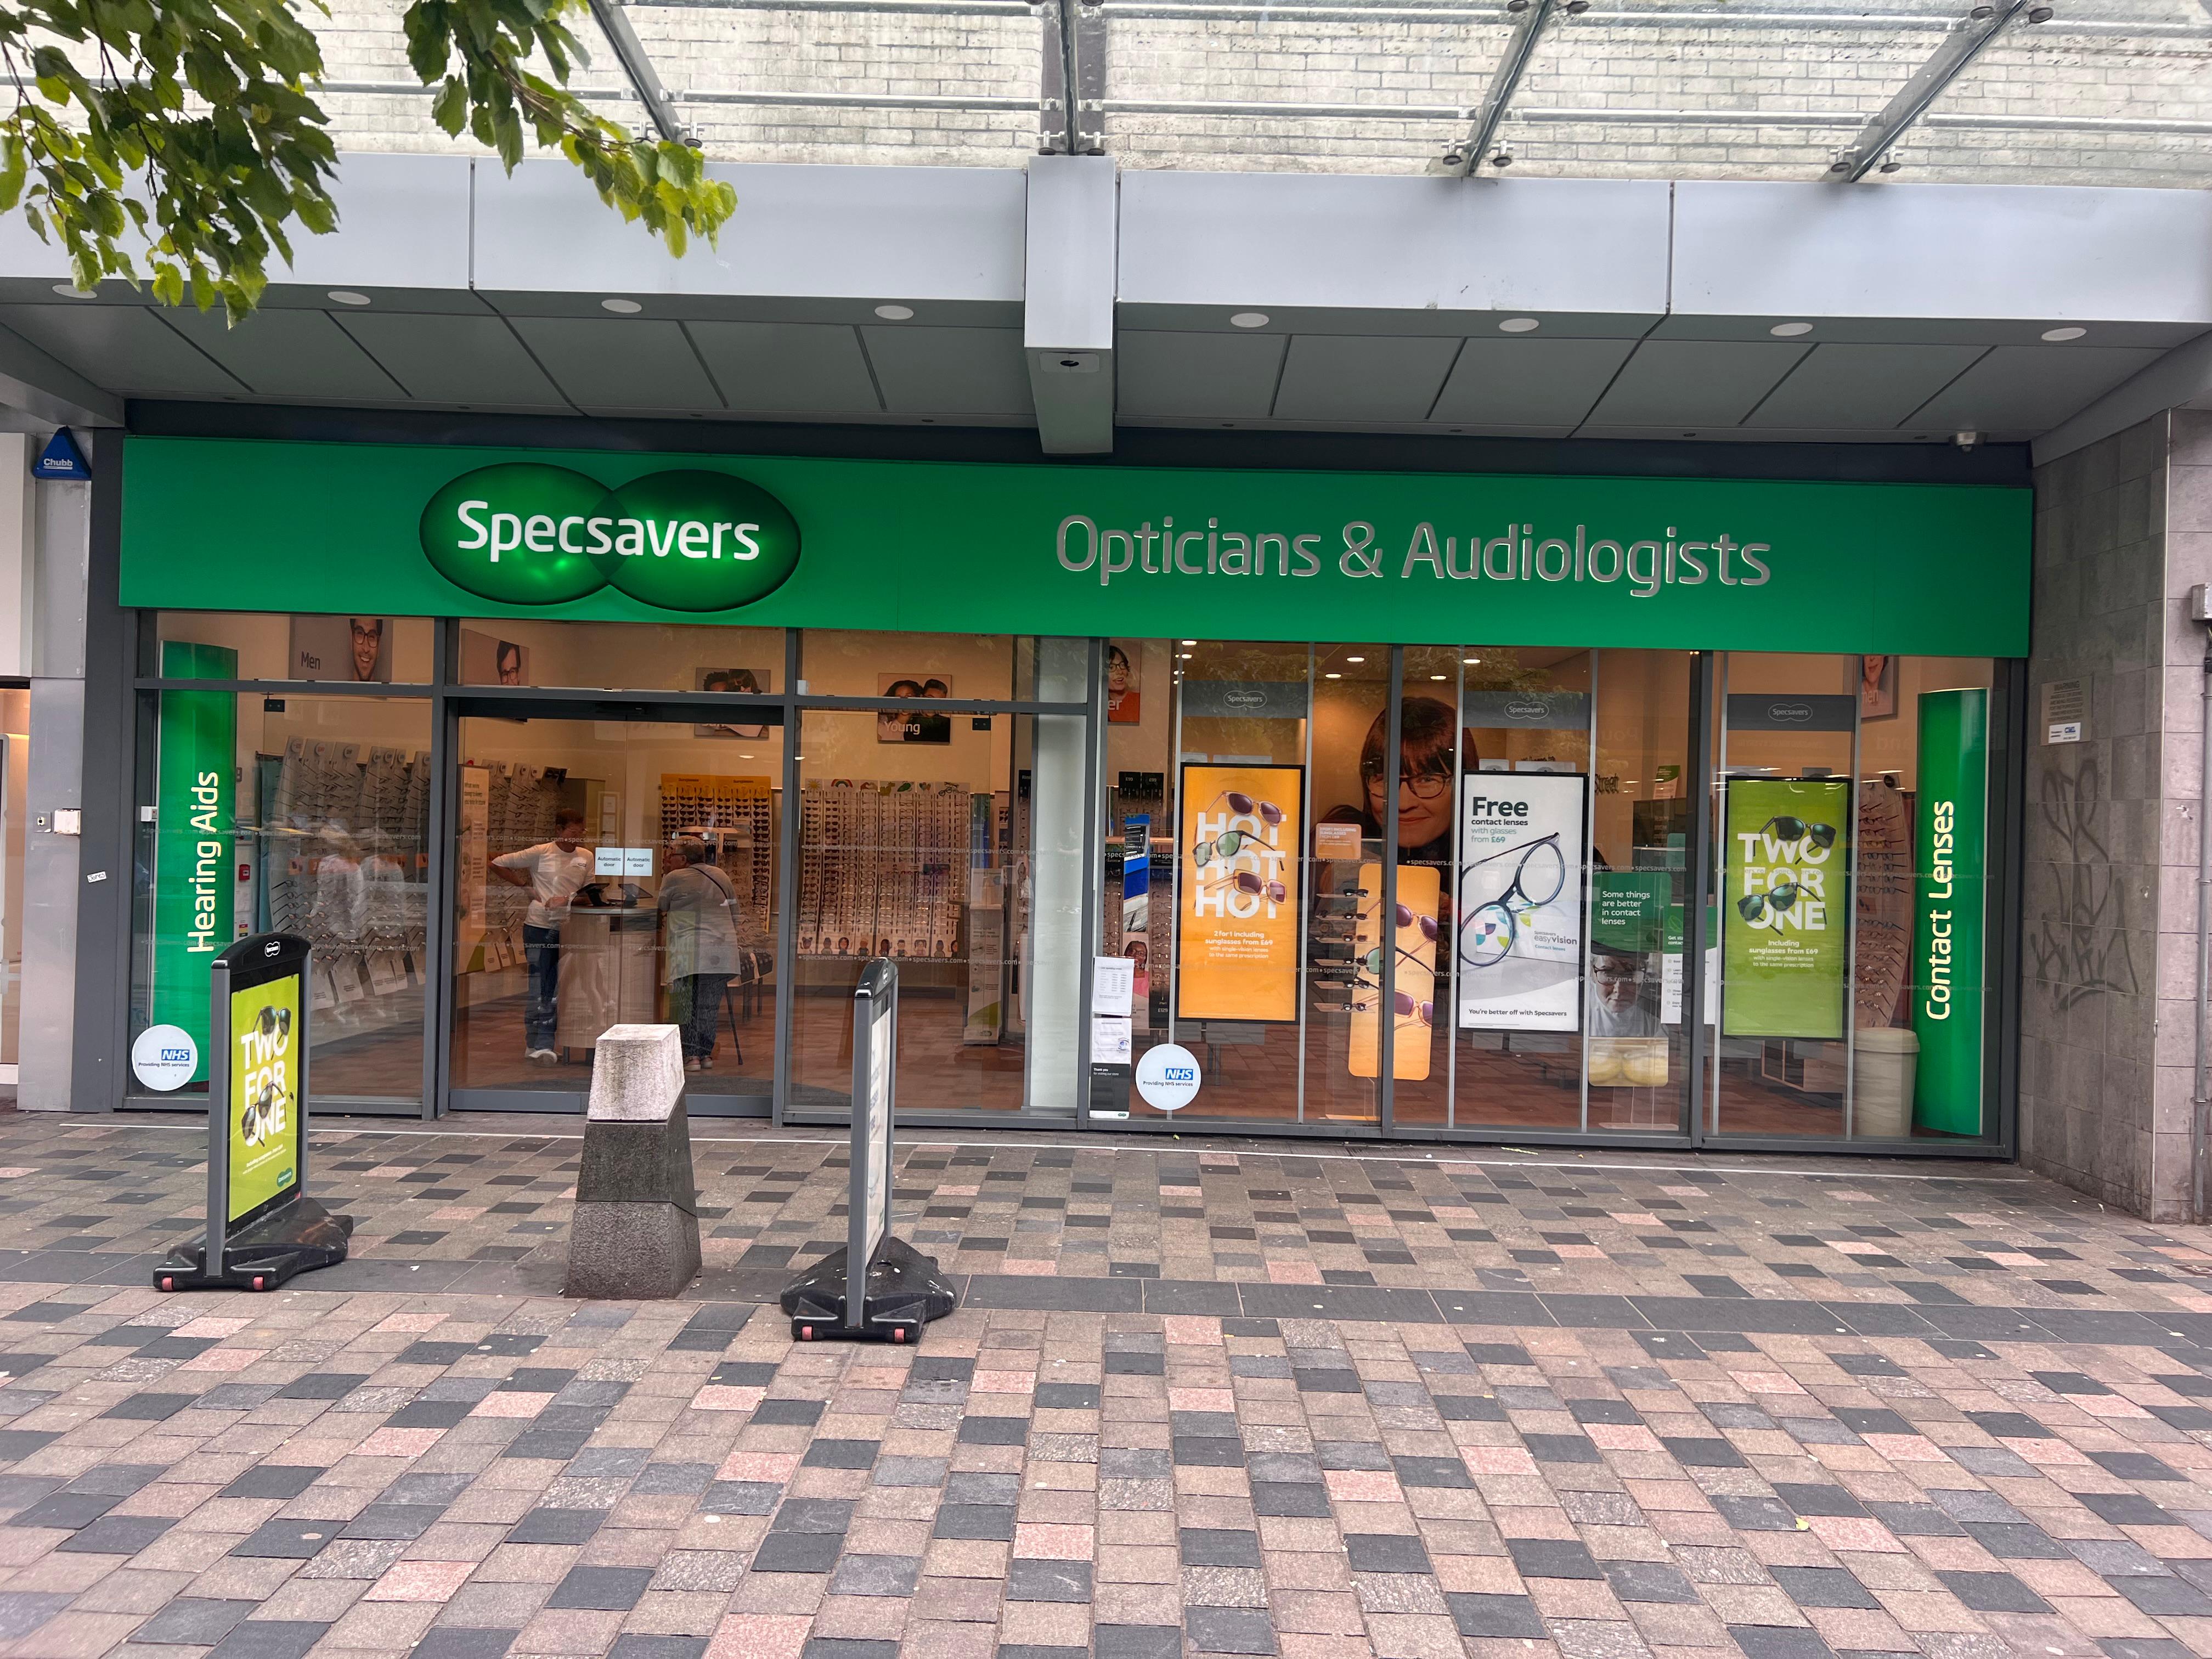 Images Specsavers Opticians and Audiologists - Sauchiehall Street